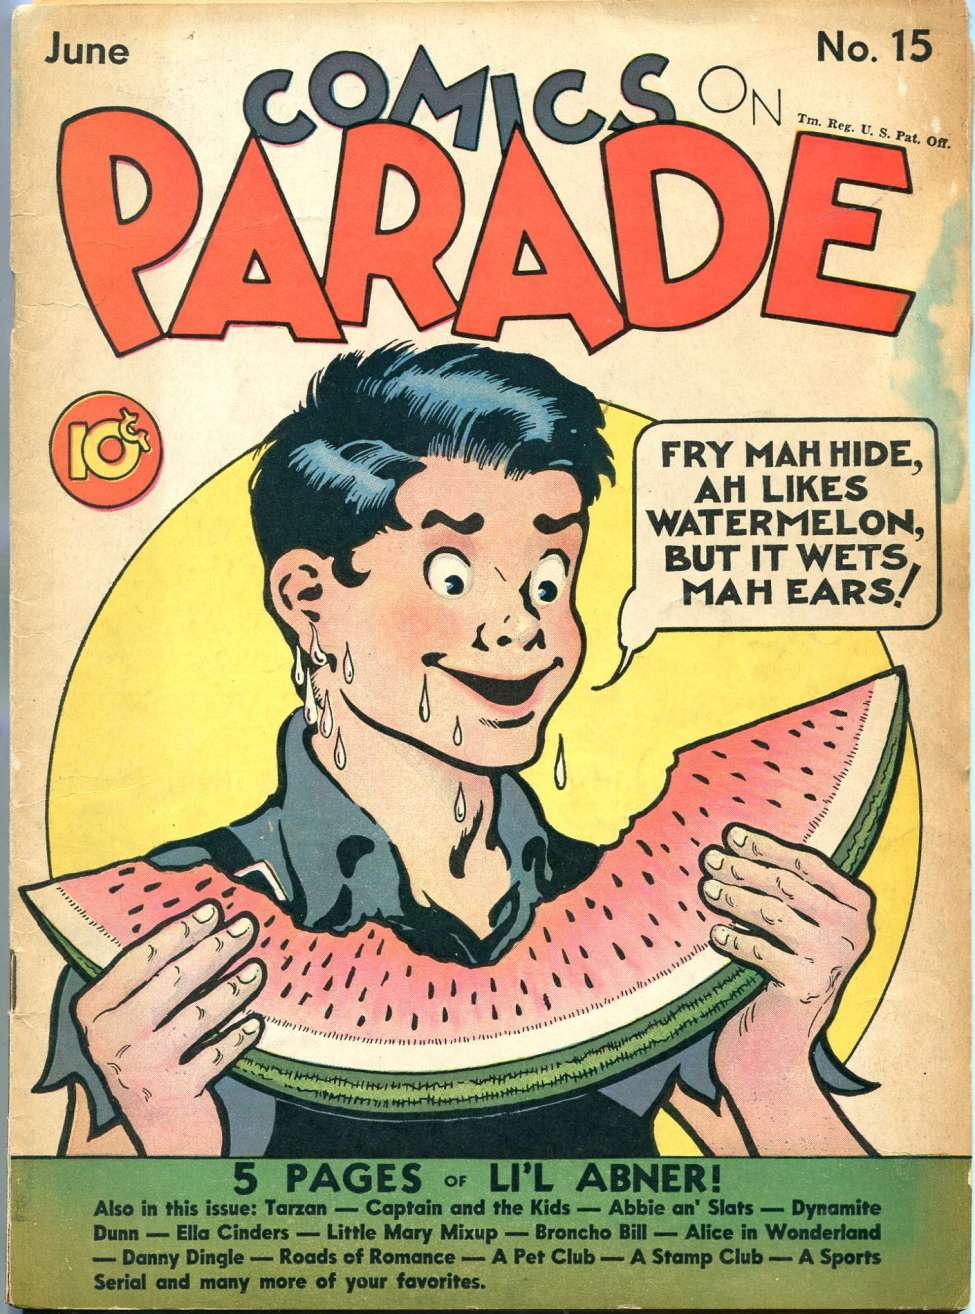 Book Cover For Comics on Parade 15